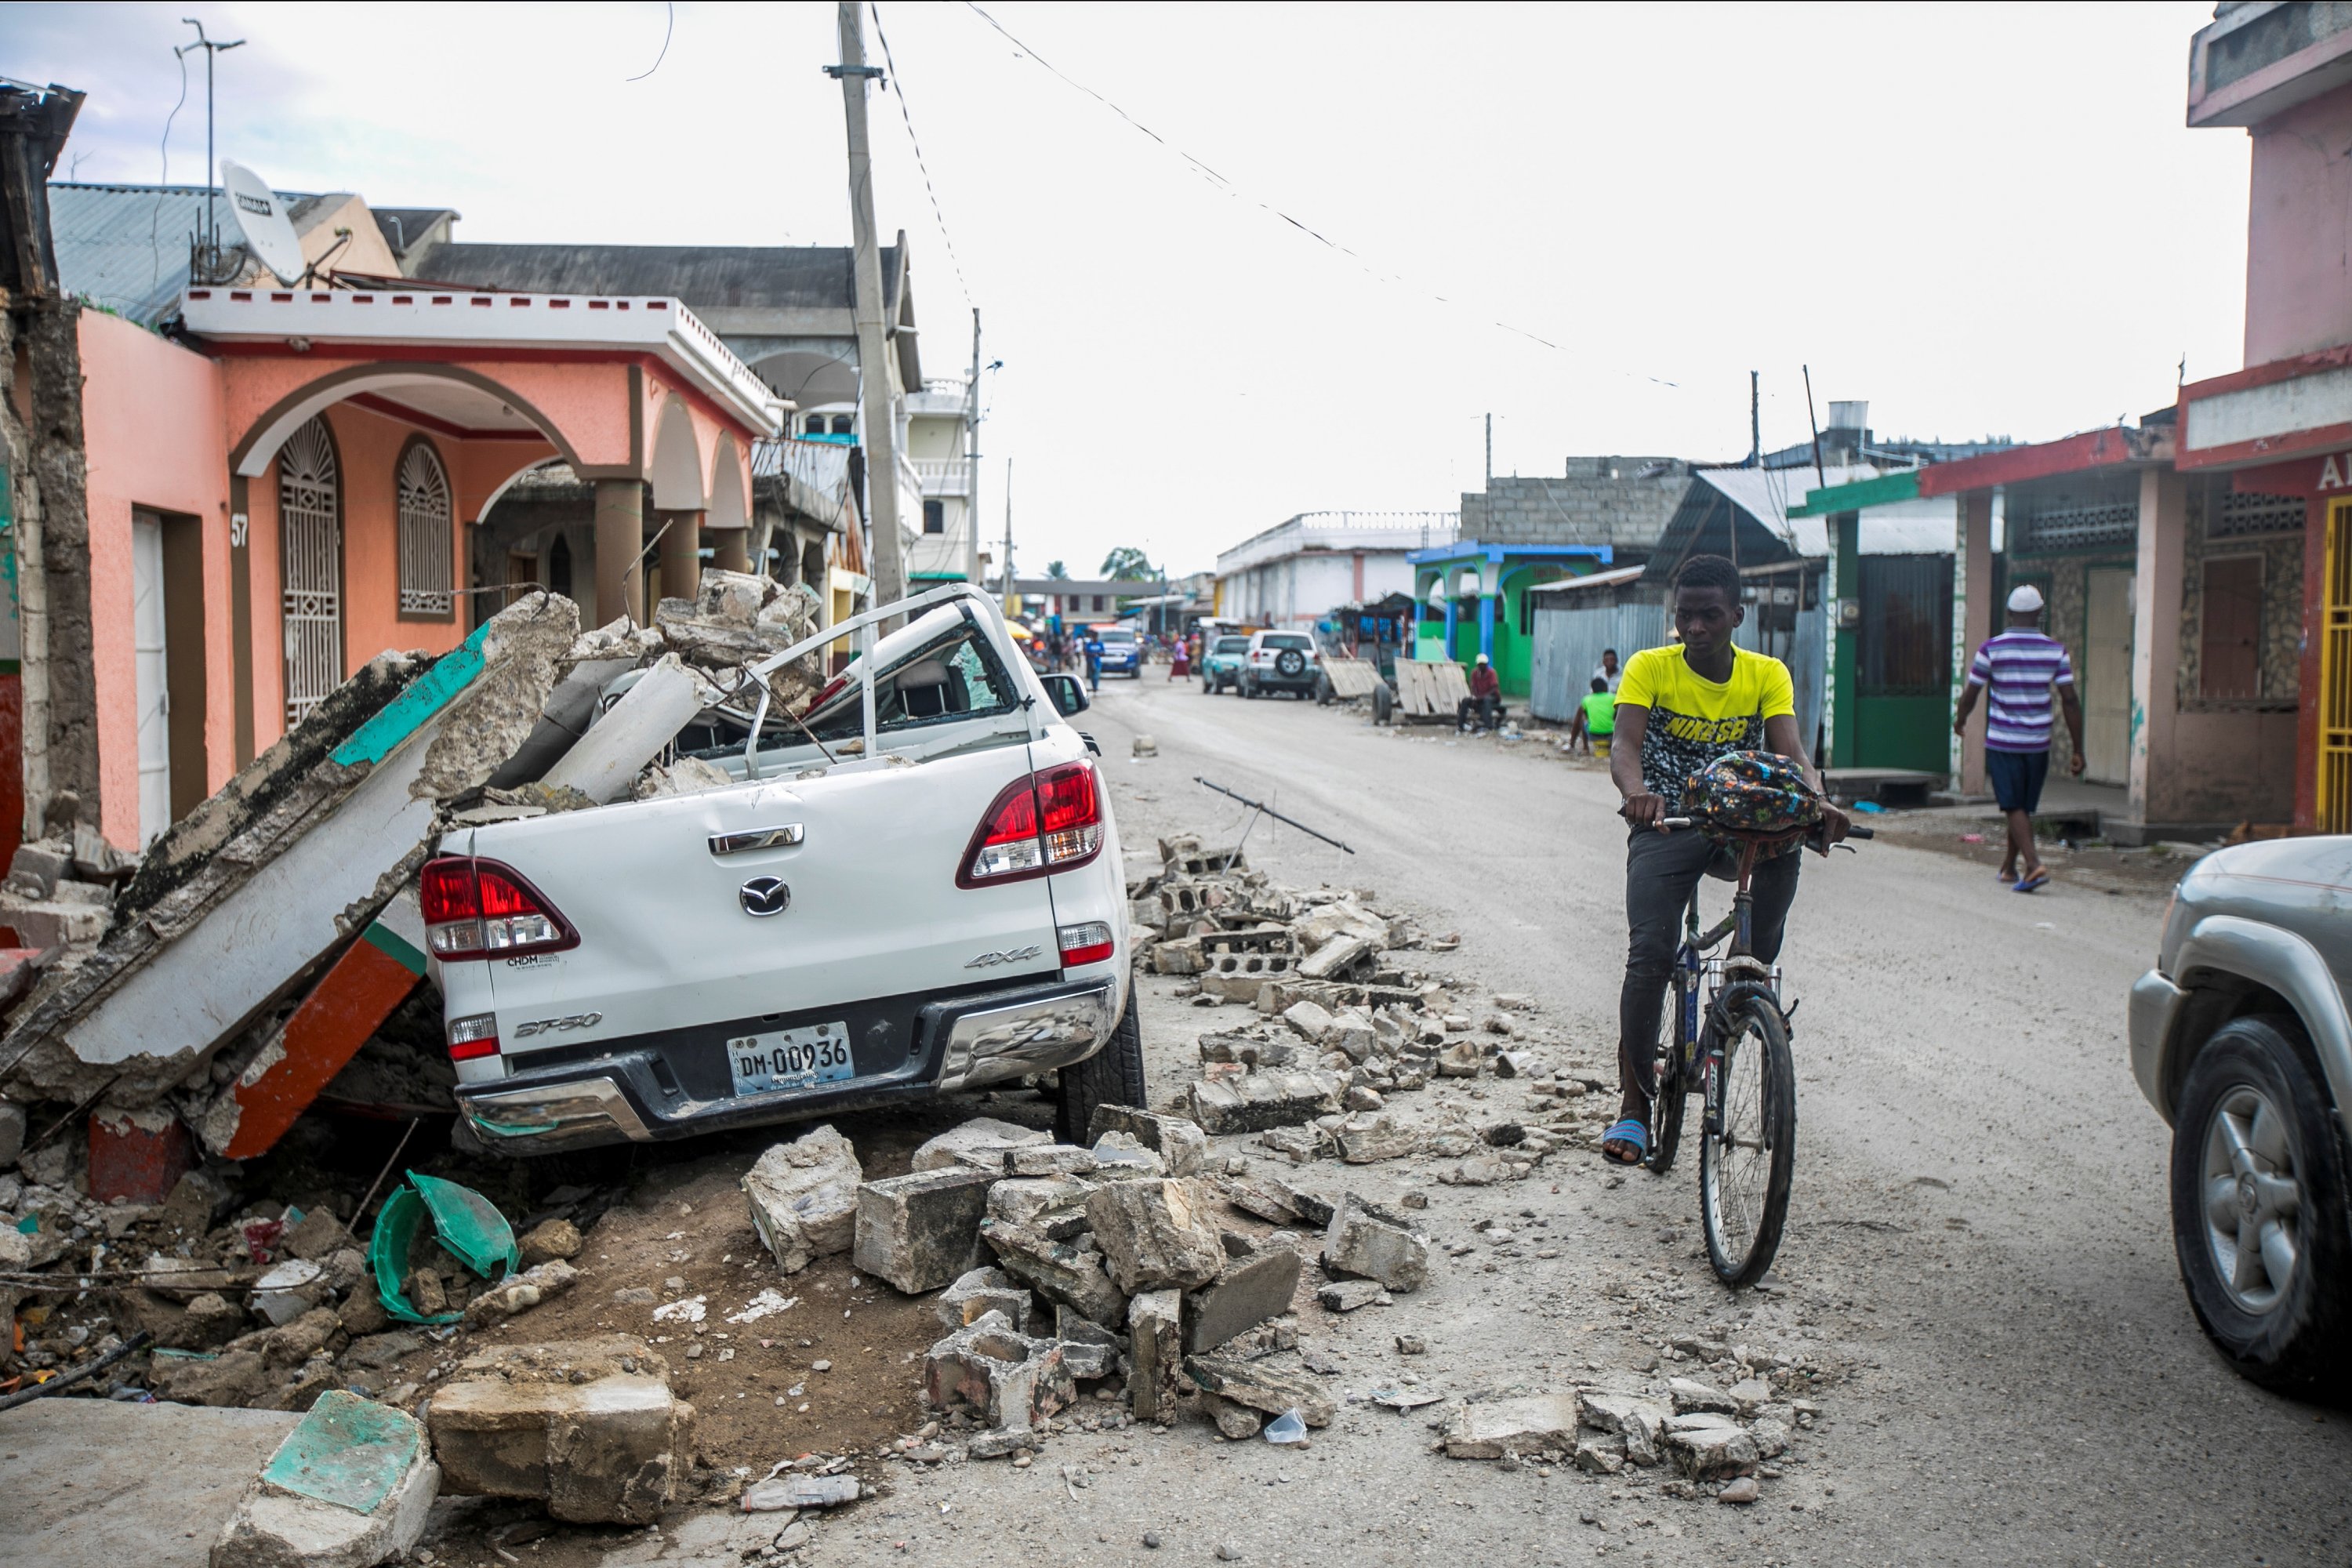 A car damaged is pictured under debris after a 7.2 magnitude earthquake in Les Cayes, Haiti, Aug. 15, 2021. (Reuters Photo)